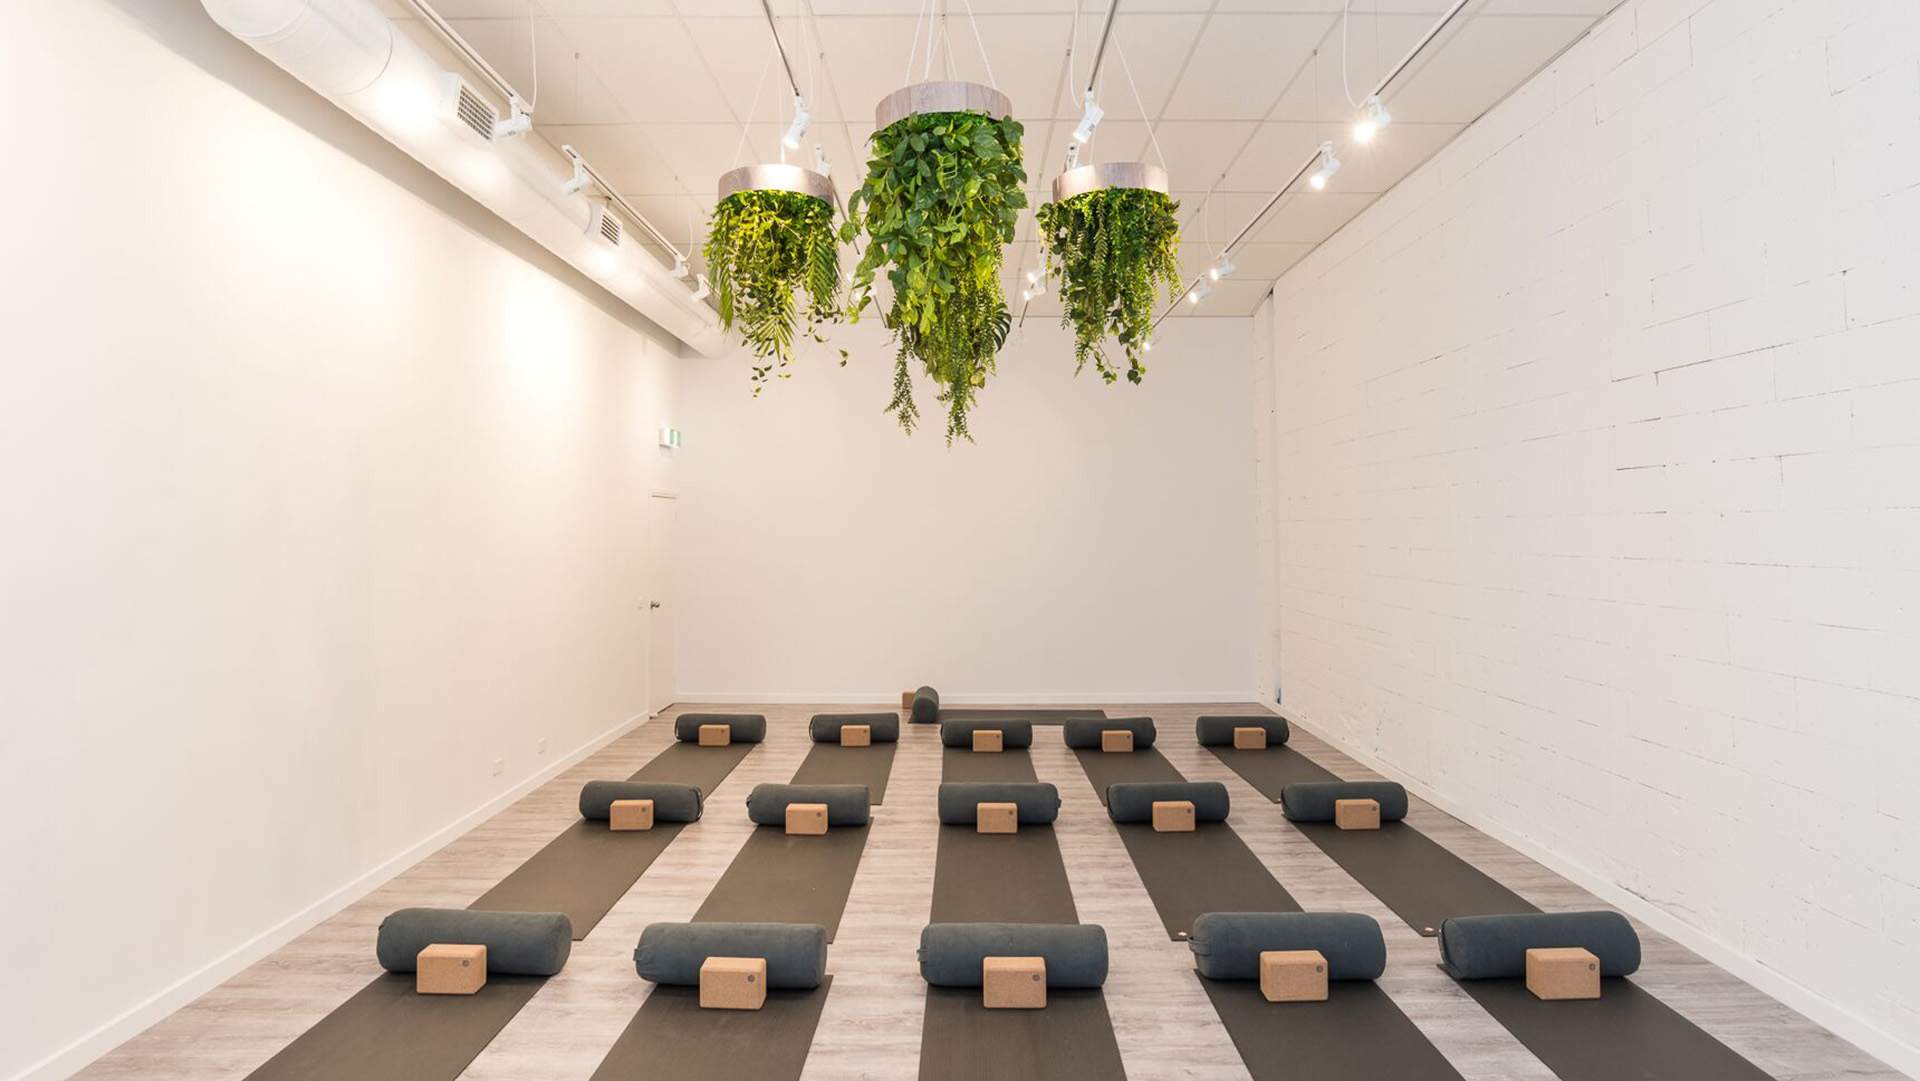 All for One Is Yarraville's New Greenery-Filled Full-Service Health and Wellness Studio